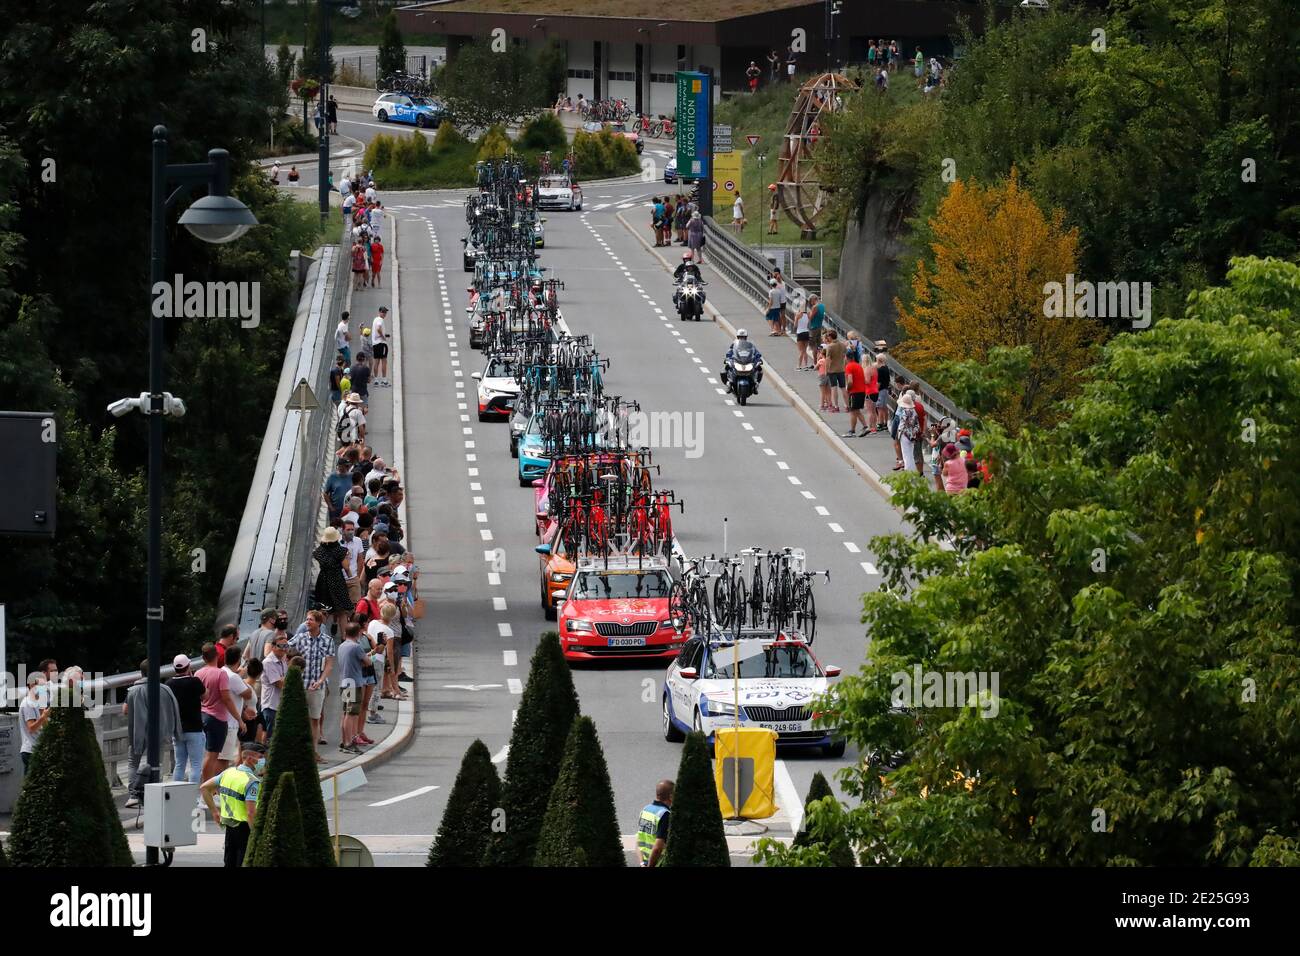 Criterium du Dauphine cycling race in the french Alps. Saint Gervais. France. Stock Photo